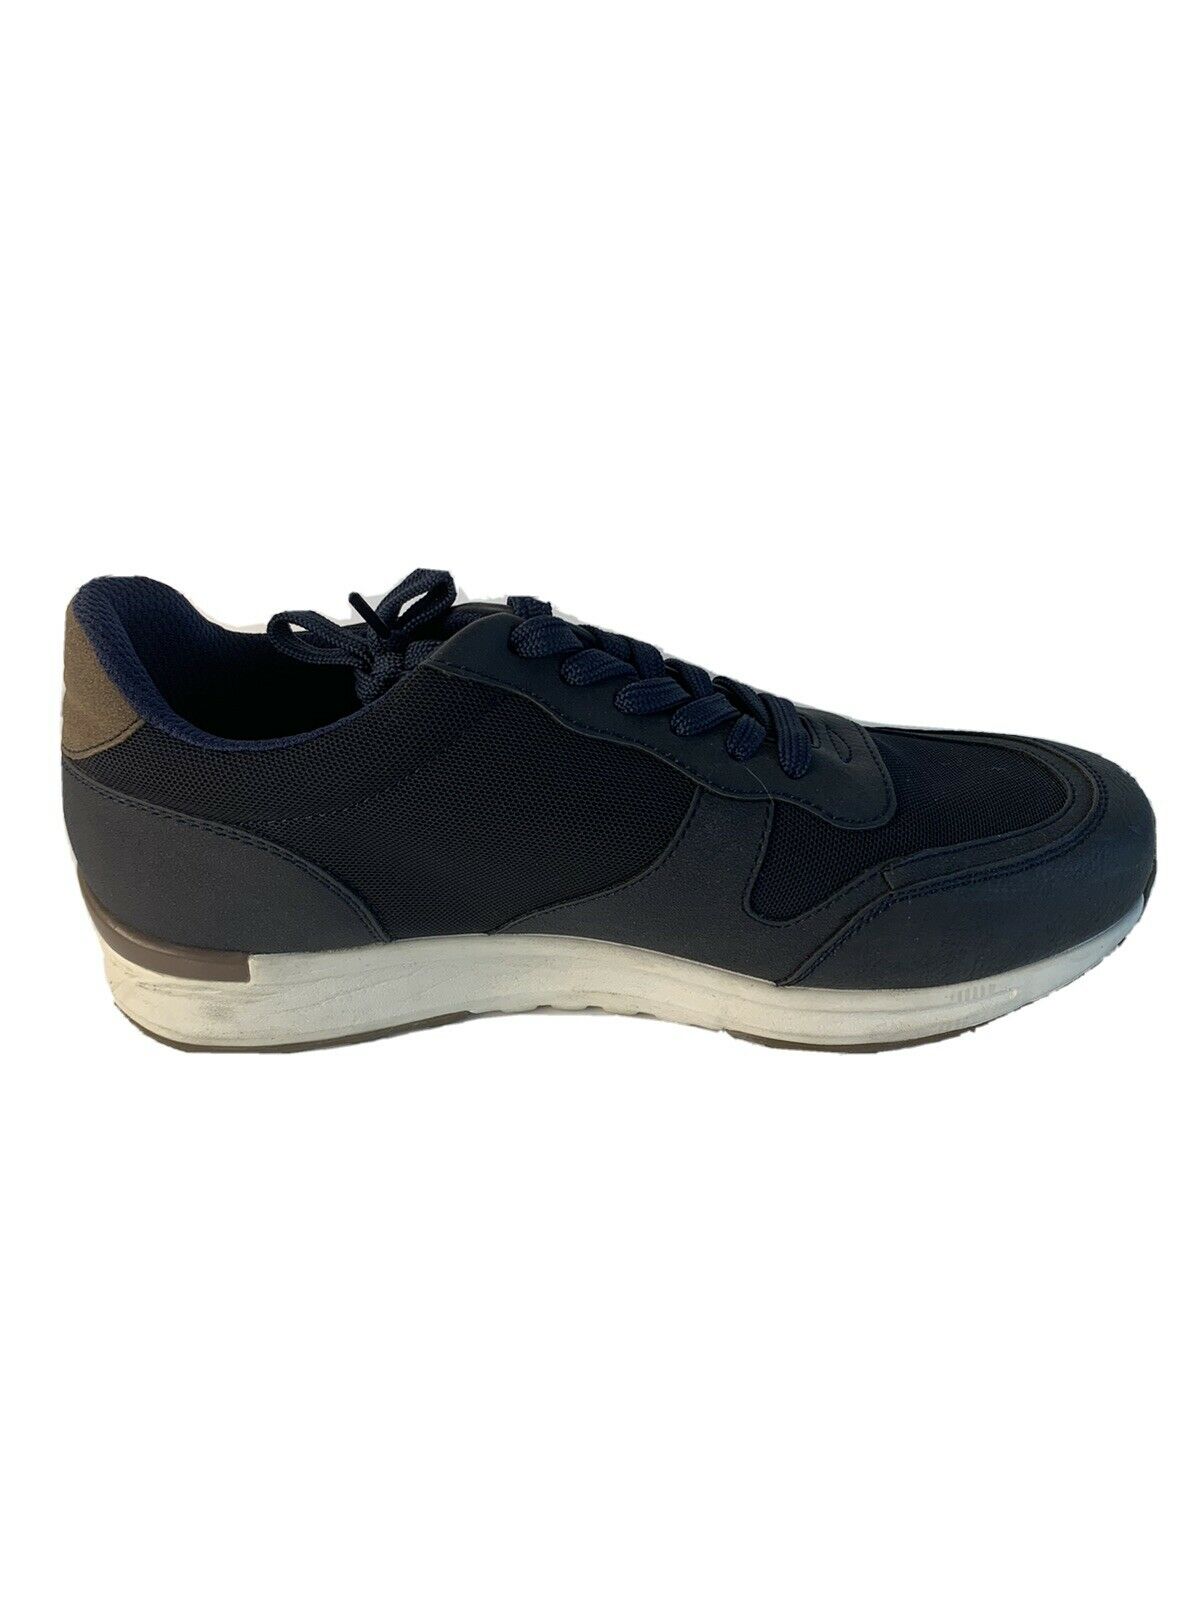 Mens Black Navy Athletic Walking Shoe Size 8.5 by Goodfellow for Target EUC 7461